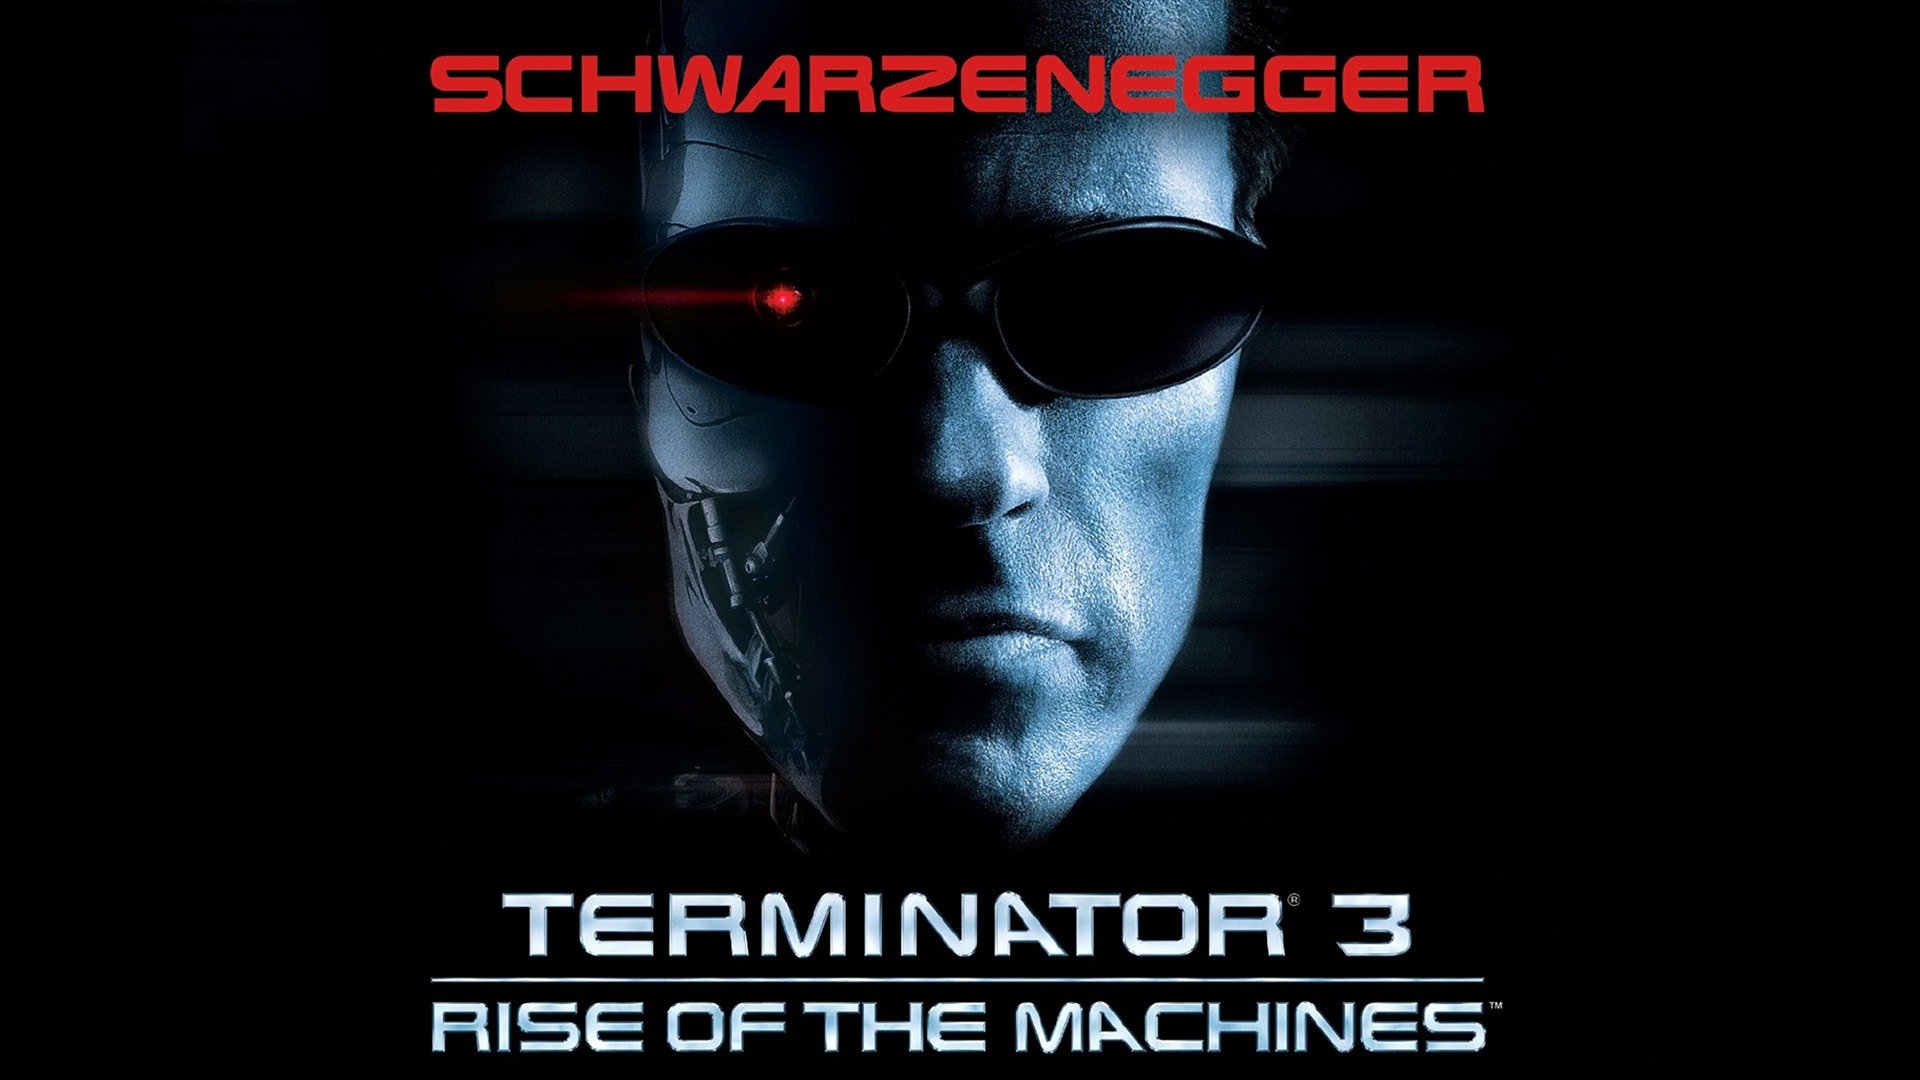 39-facts-about-the-movie-terminator-3-rise-of-the-machines